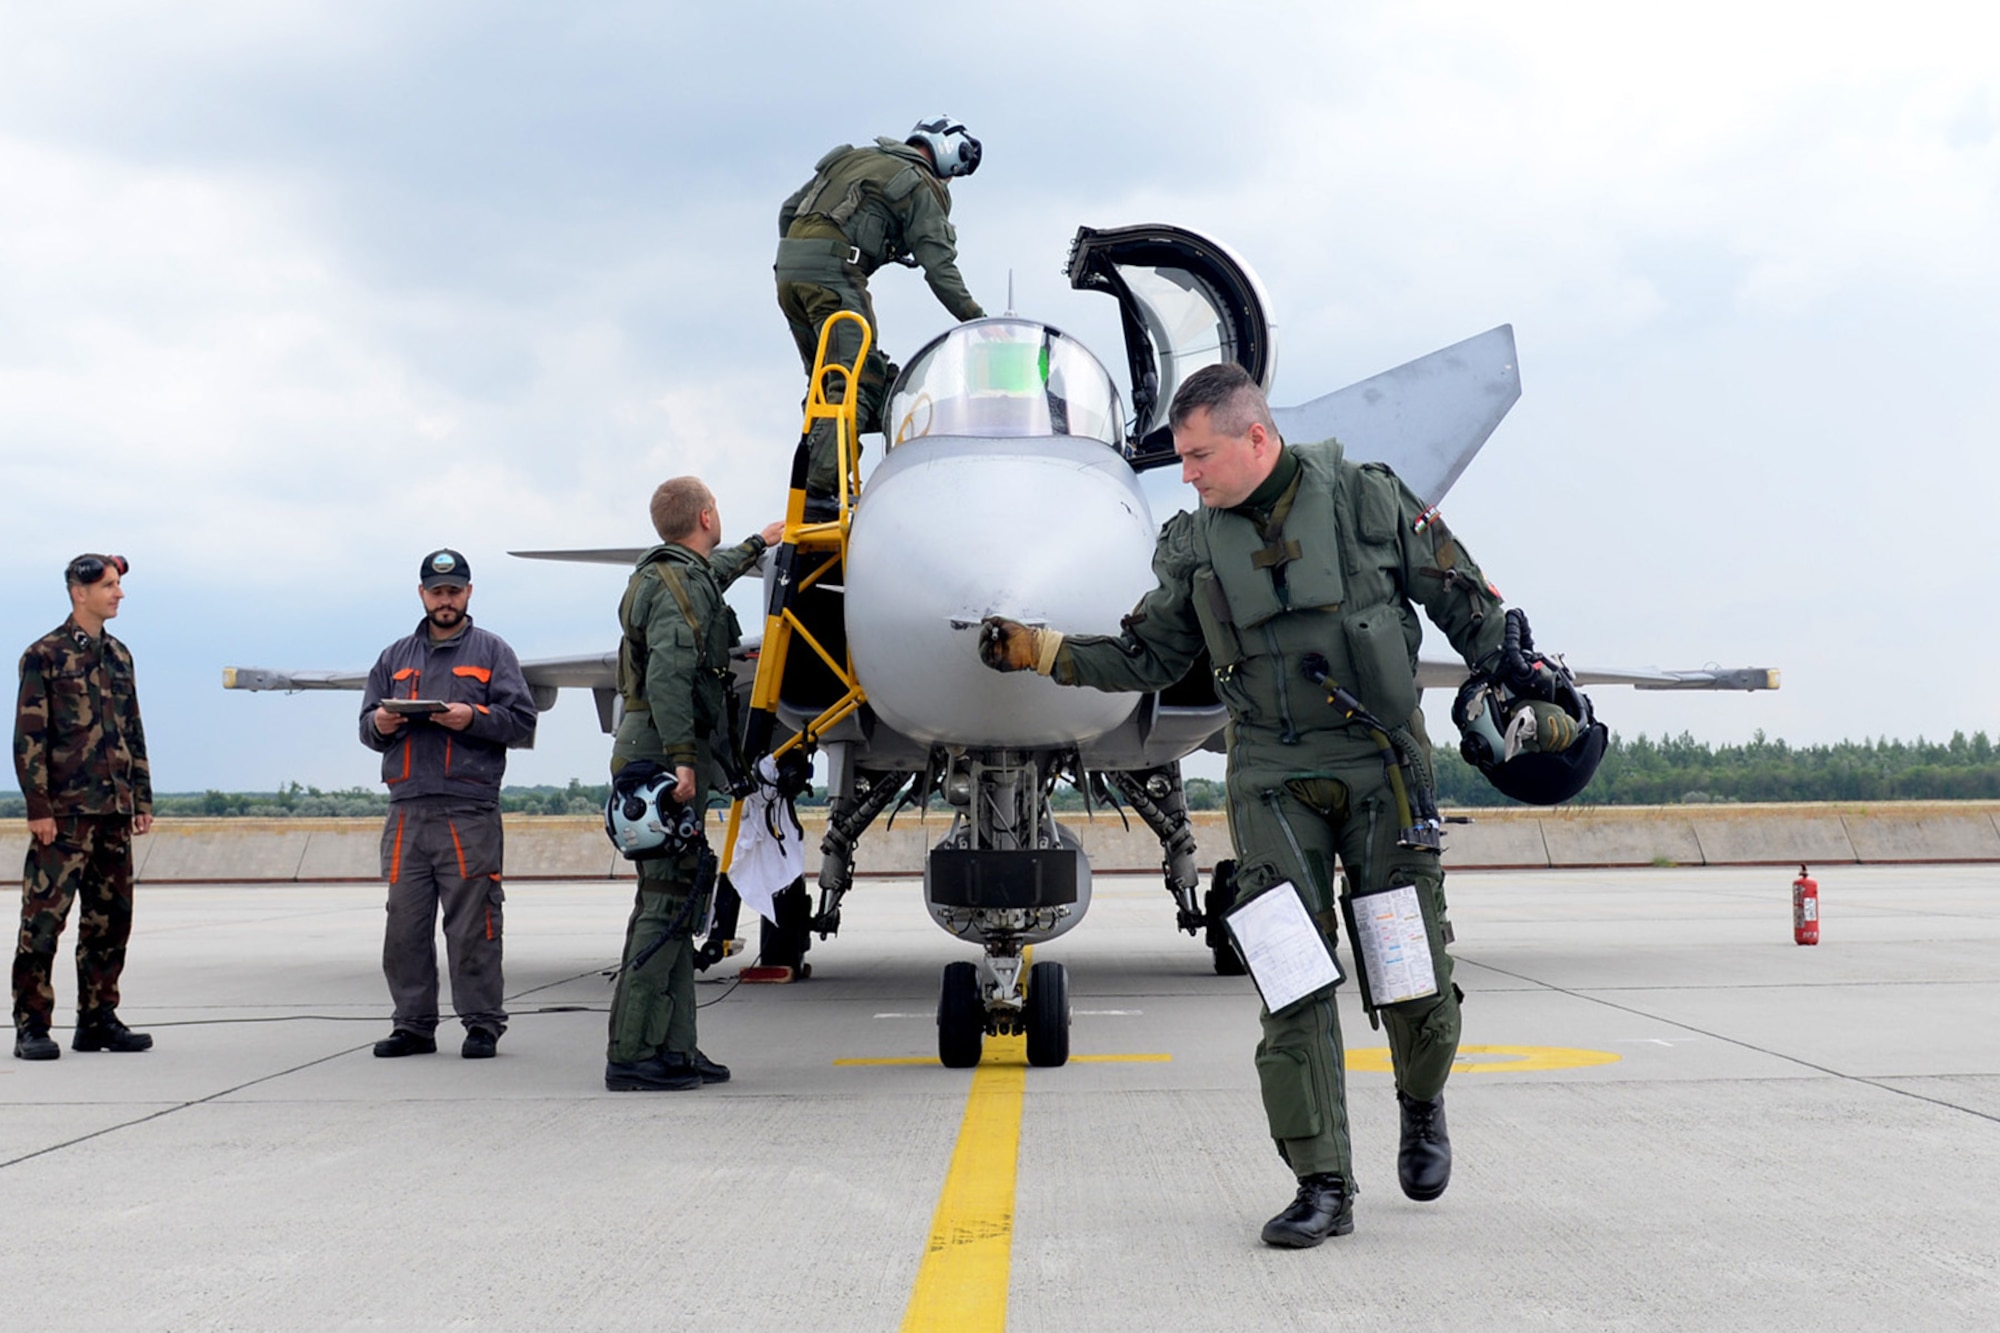 Hungarian and Swedish air force JAS-39 Gripen pilots perform a pre-flight inspection on their jet prior to take-off June 24, 2015, during air refueling familiarization training on Kecskemét air base, Hungary. Hungarian, U.S. and Swedish air force personnel met for a two-week familiarization period enabling the Hungarian JAS-39 Gripen pilots to successfully perform air refueling for the first time. (U.S. Air Force photo by Senior Airman Kate Thornton/Released)